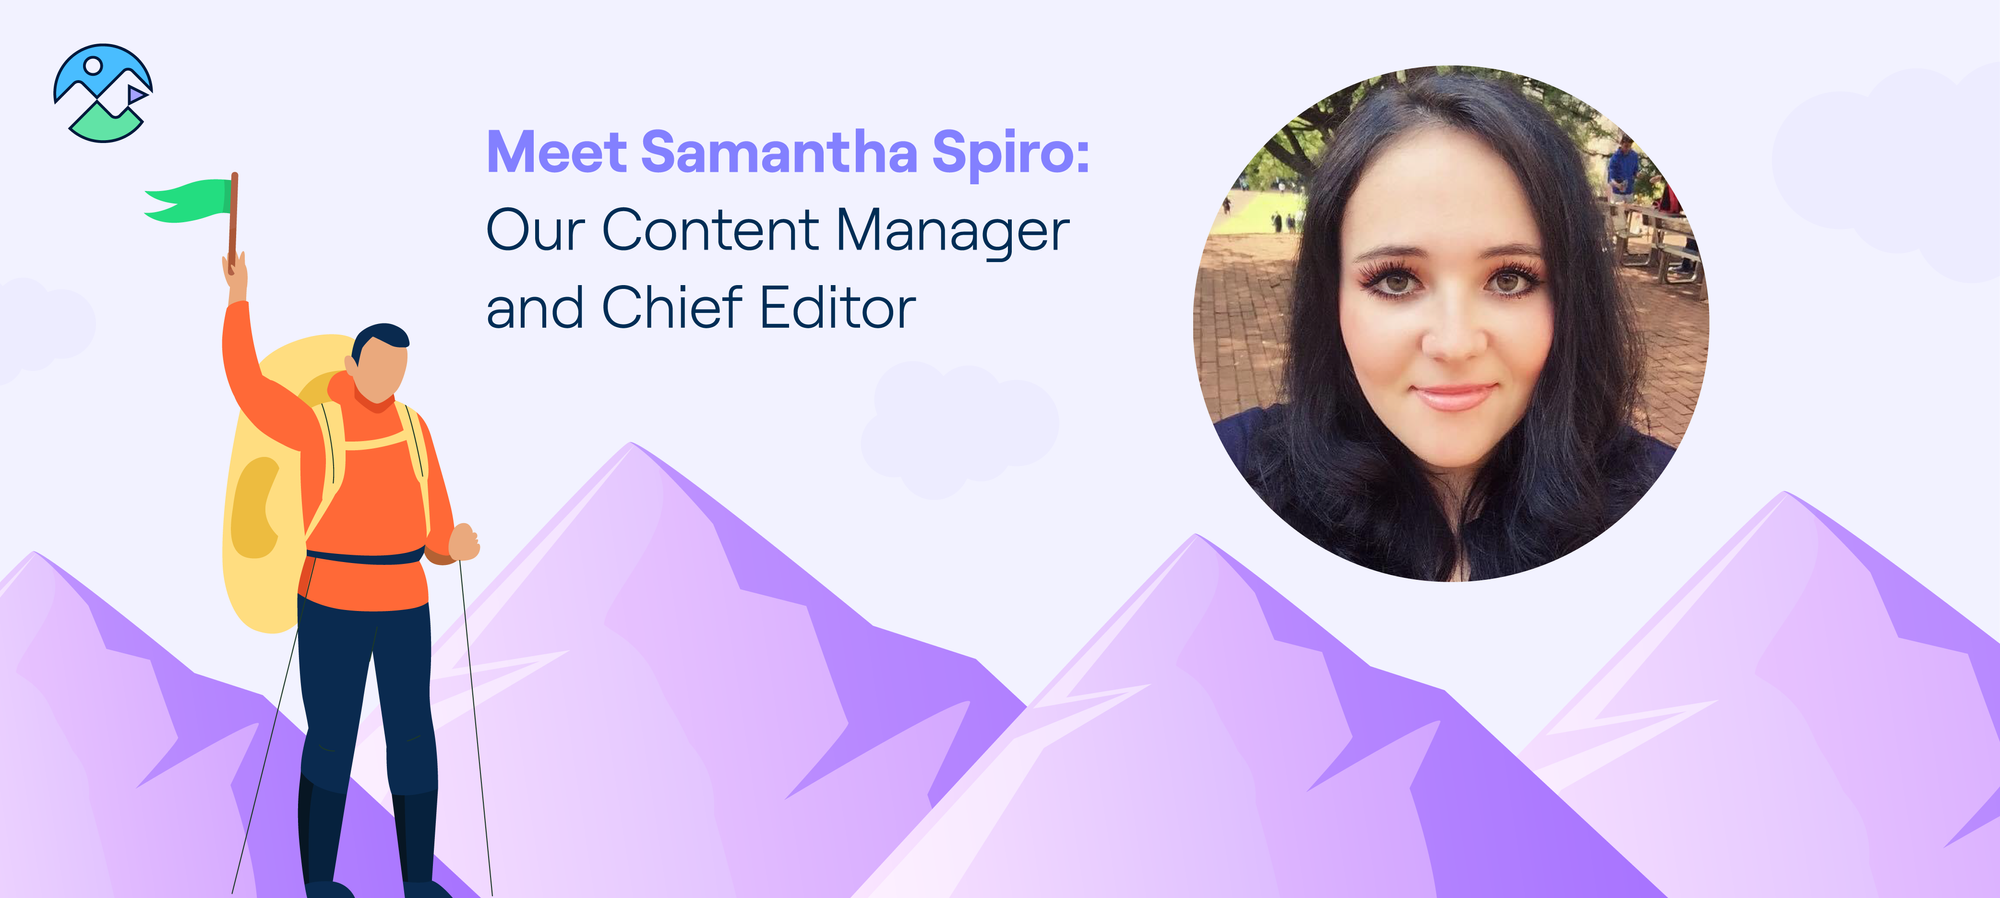 Introducing our first team member spotlight